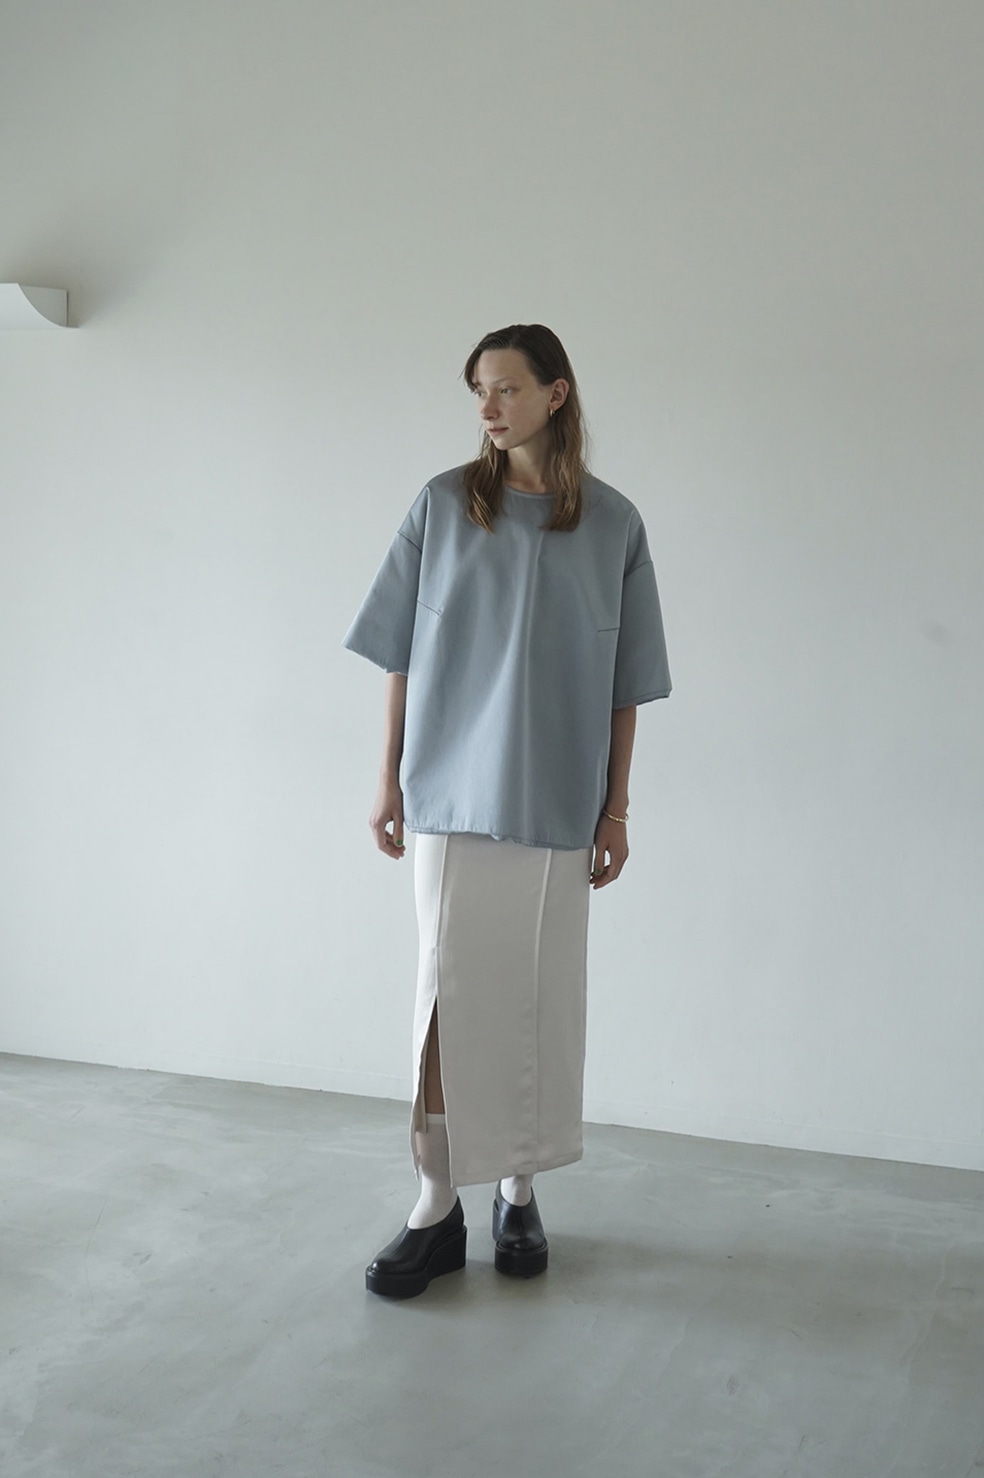 PADDED SATIN TOPS｜TOPS(トップス)｜CLANE OFFICIAL ONLINE STORE